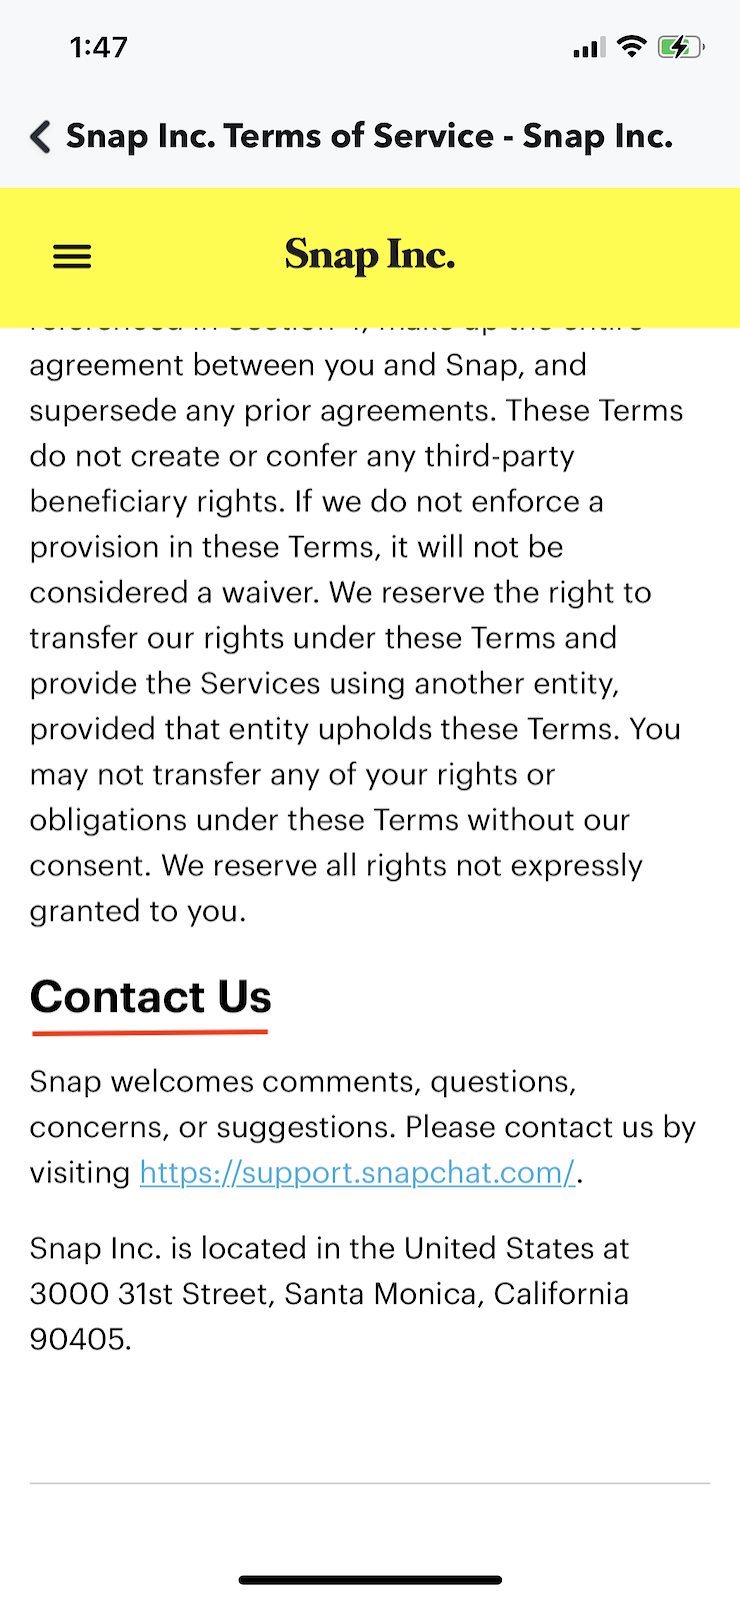 Snapchat-terms-and-conditions-contact-information